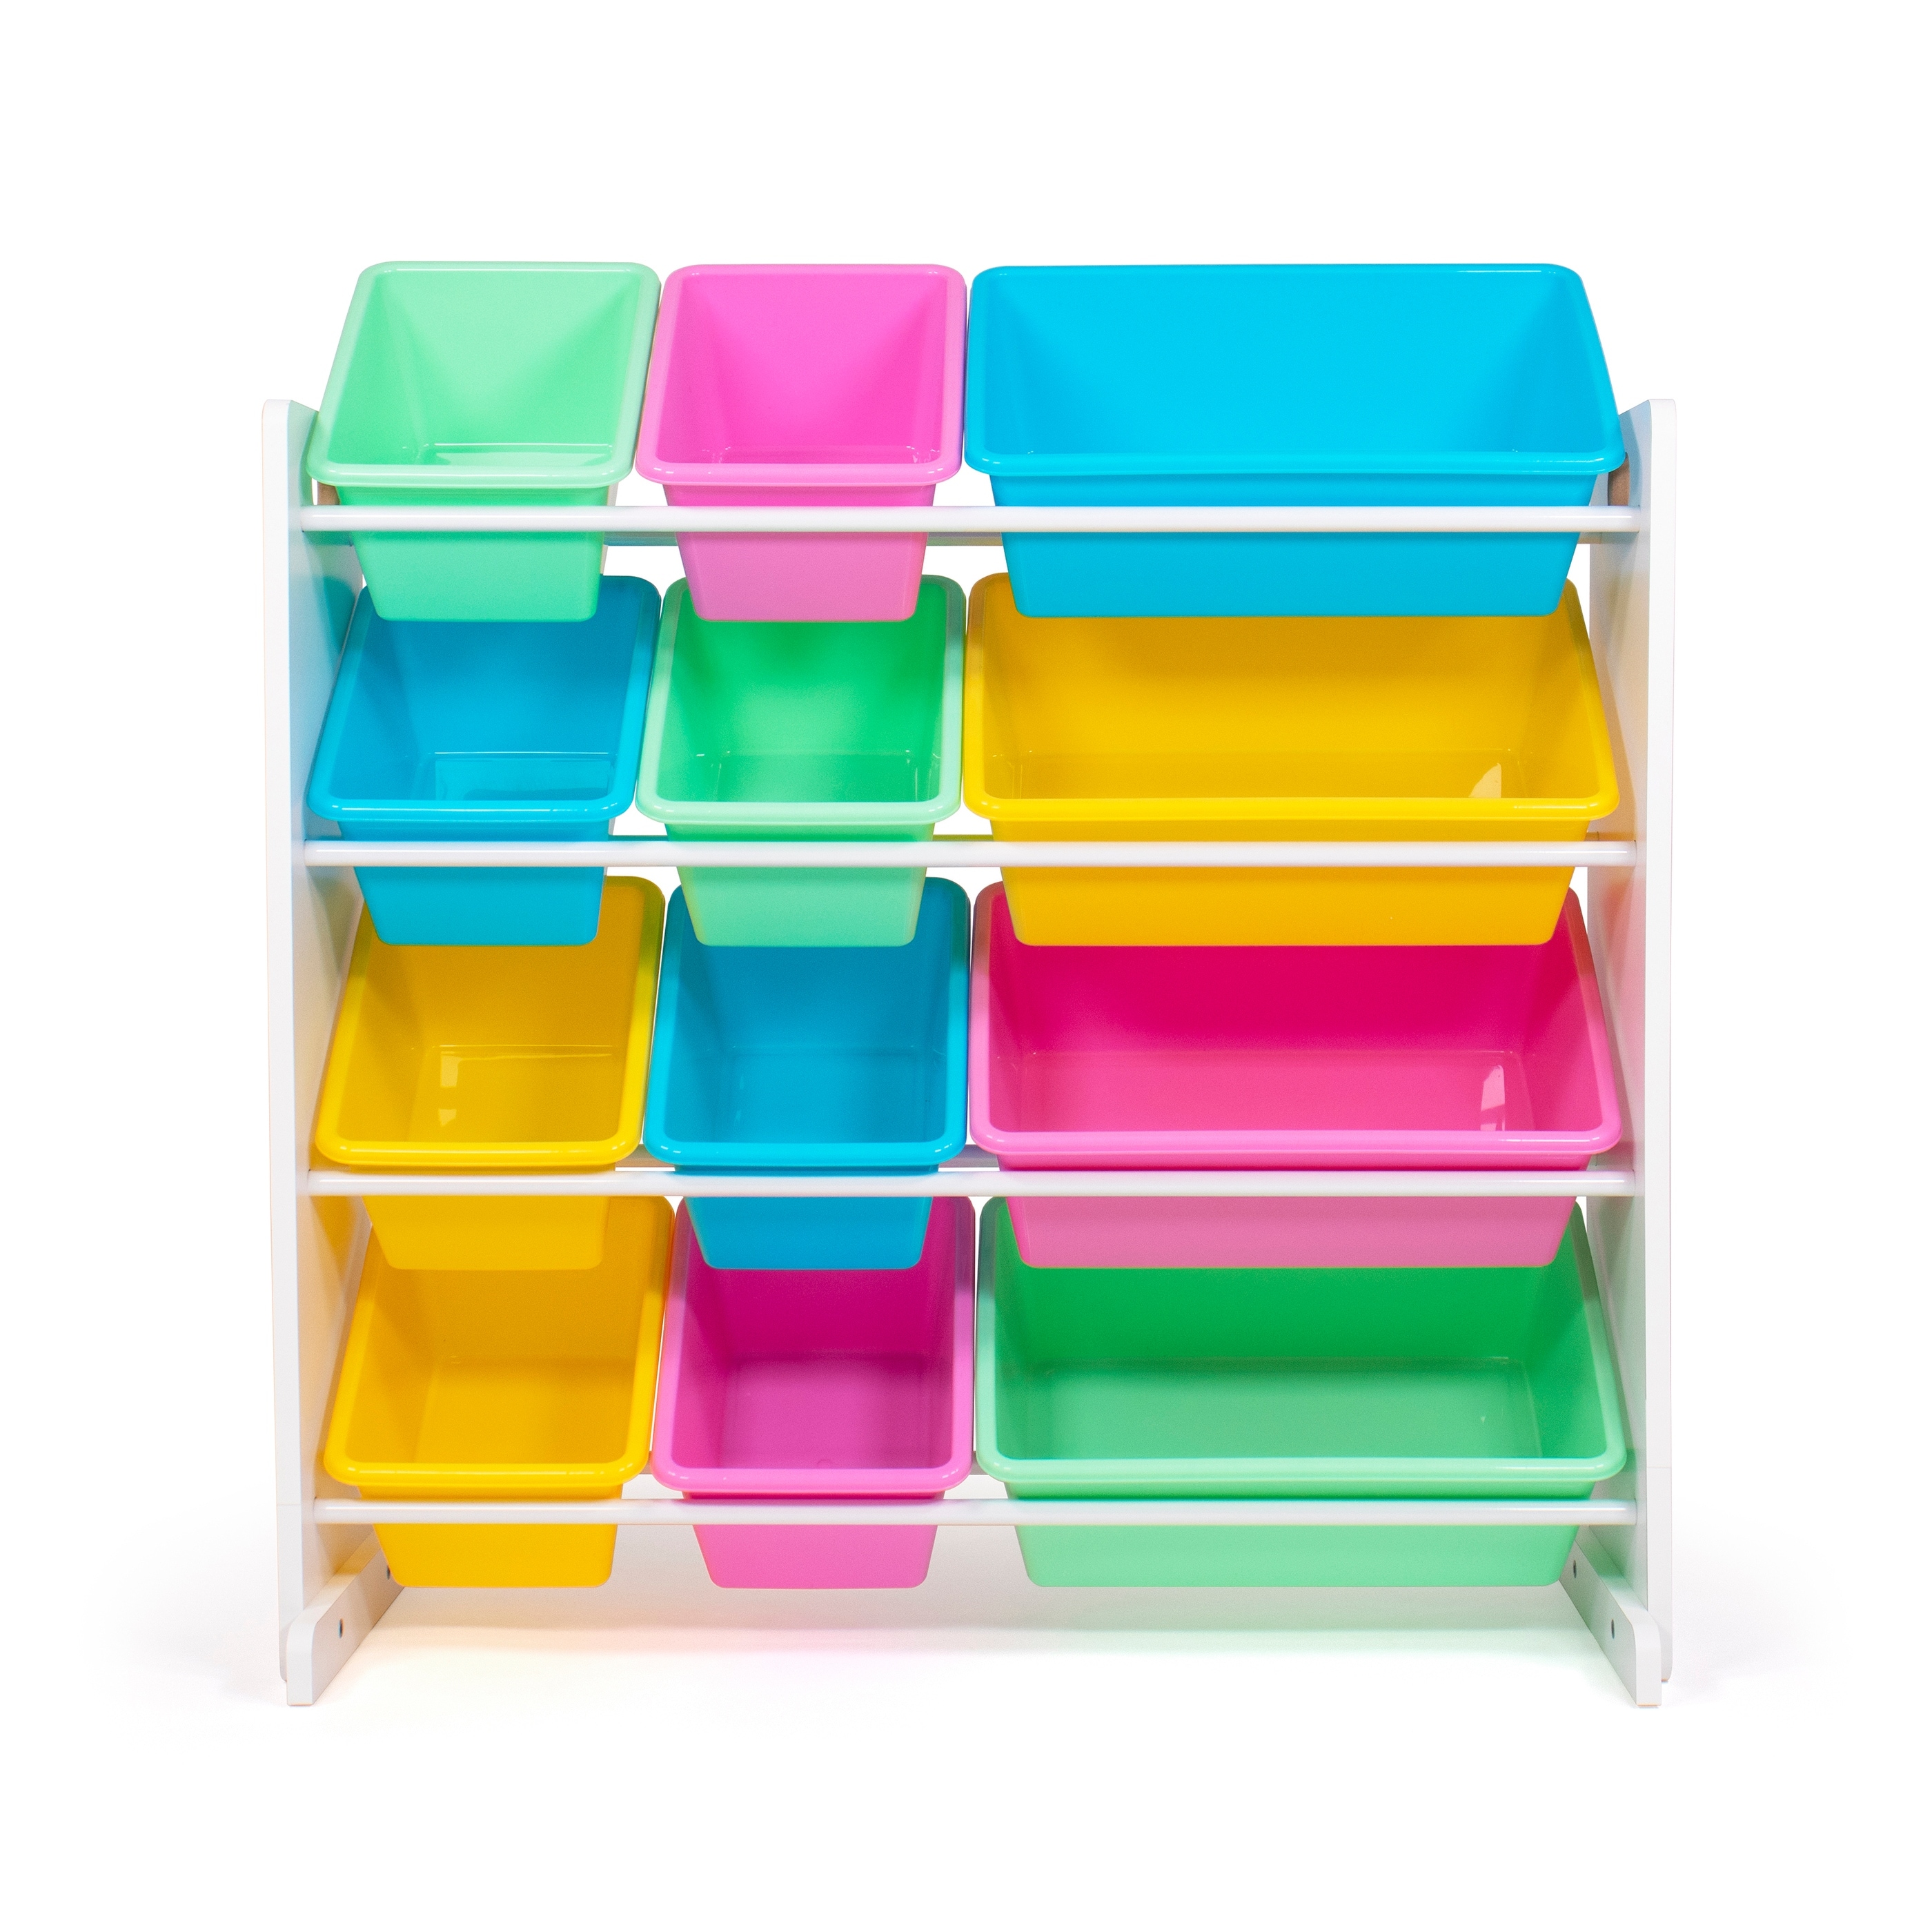 https://ak1.ostkcdn.com/images/products/is/images/direct/4375266916d83823fce9d4eaac53539e4b6fbacc/Tot-Tutors-Kids-Toy-Storage-Organizer-with-12-Plastic-Bins%2C-Natural-Frame-%26-Primary-Bins.jpg